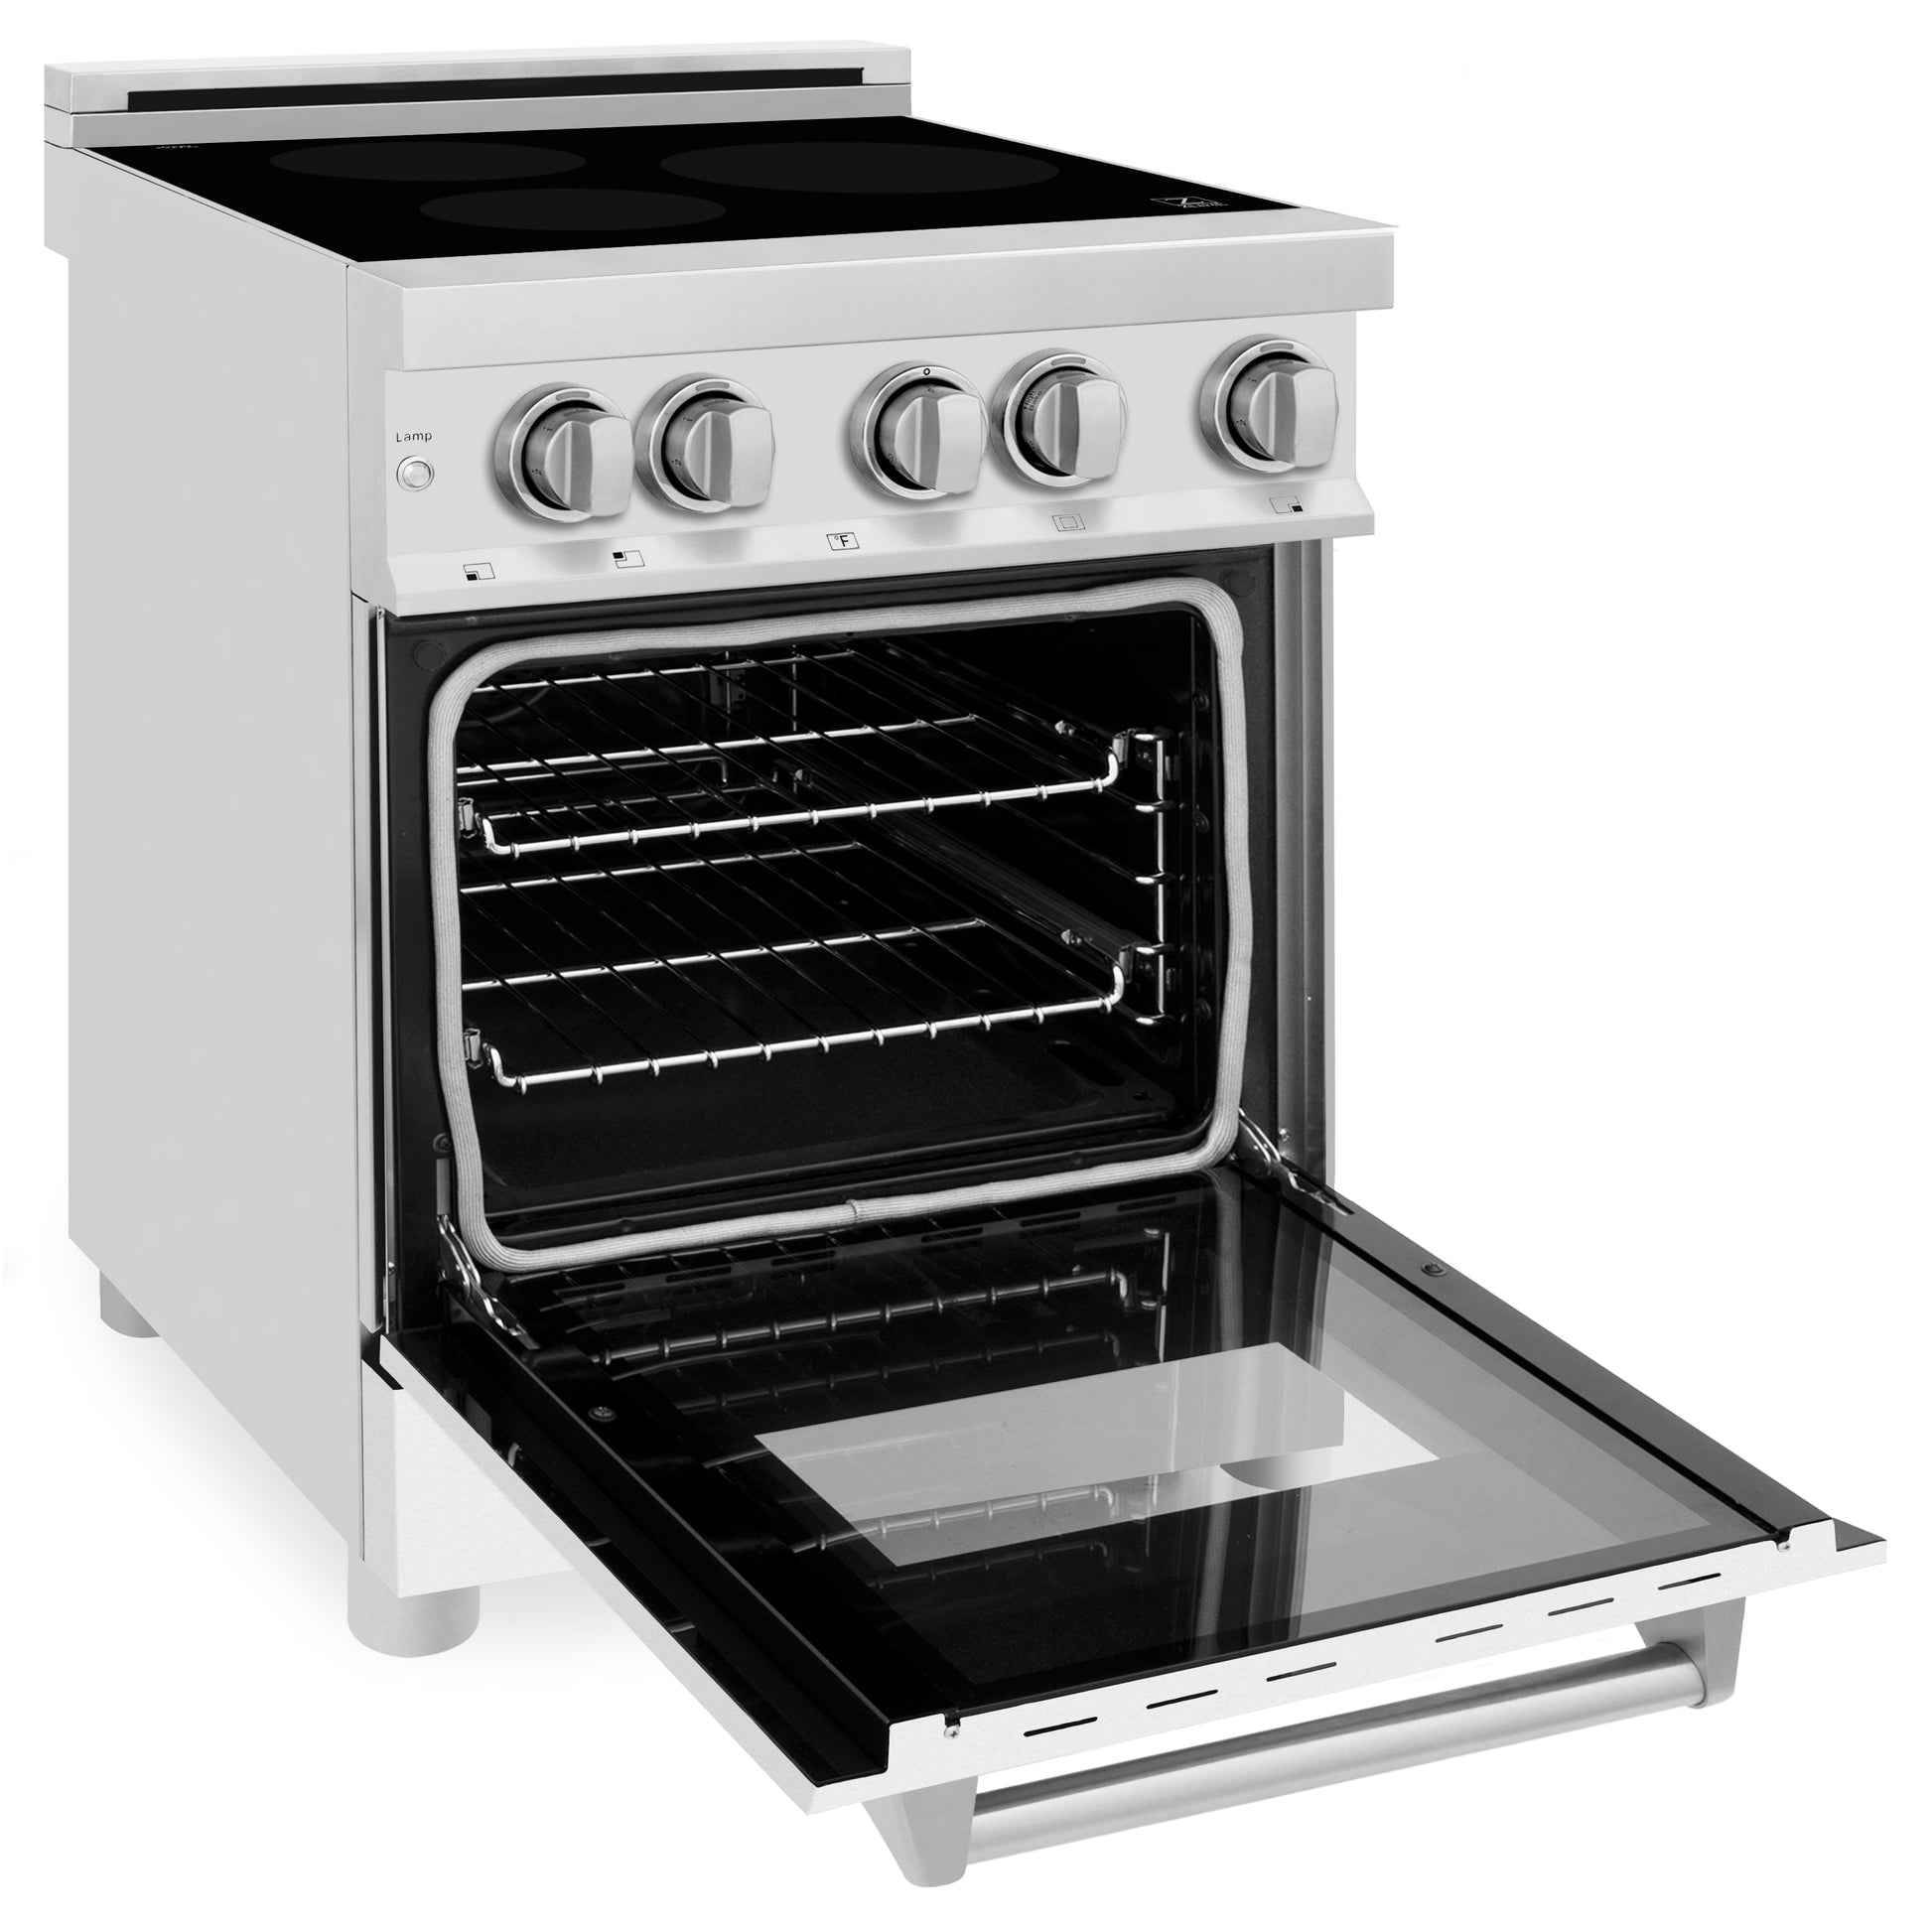 ZLINE 24" Induction Range with 3 Element Stove and Electric Oven - Stainless Steel